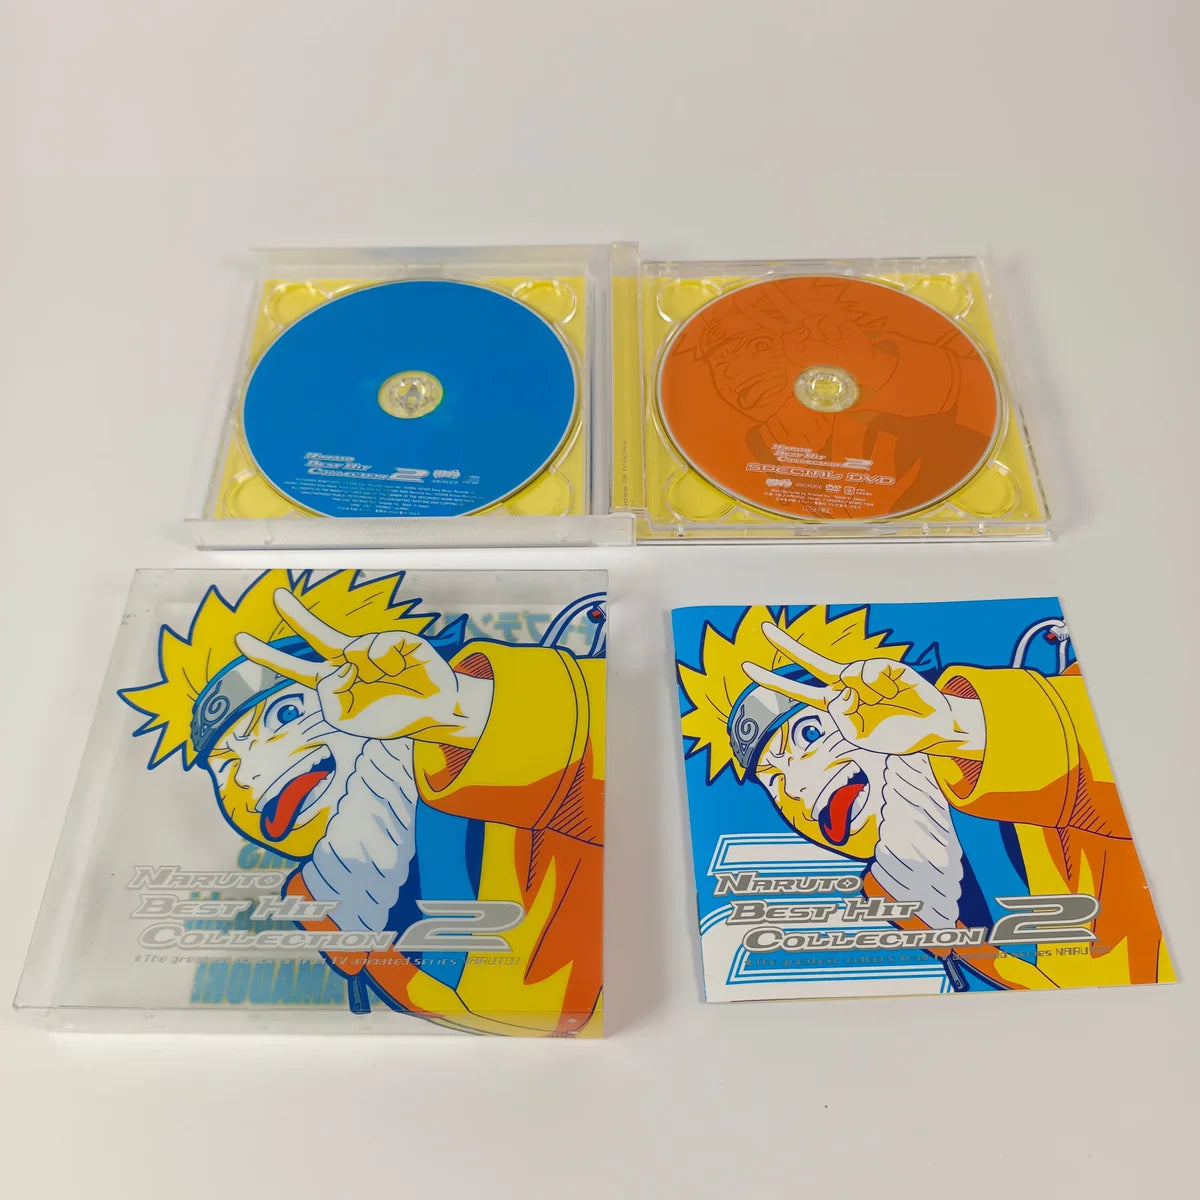 Naruto Best Hit Collection 2